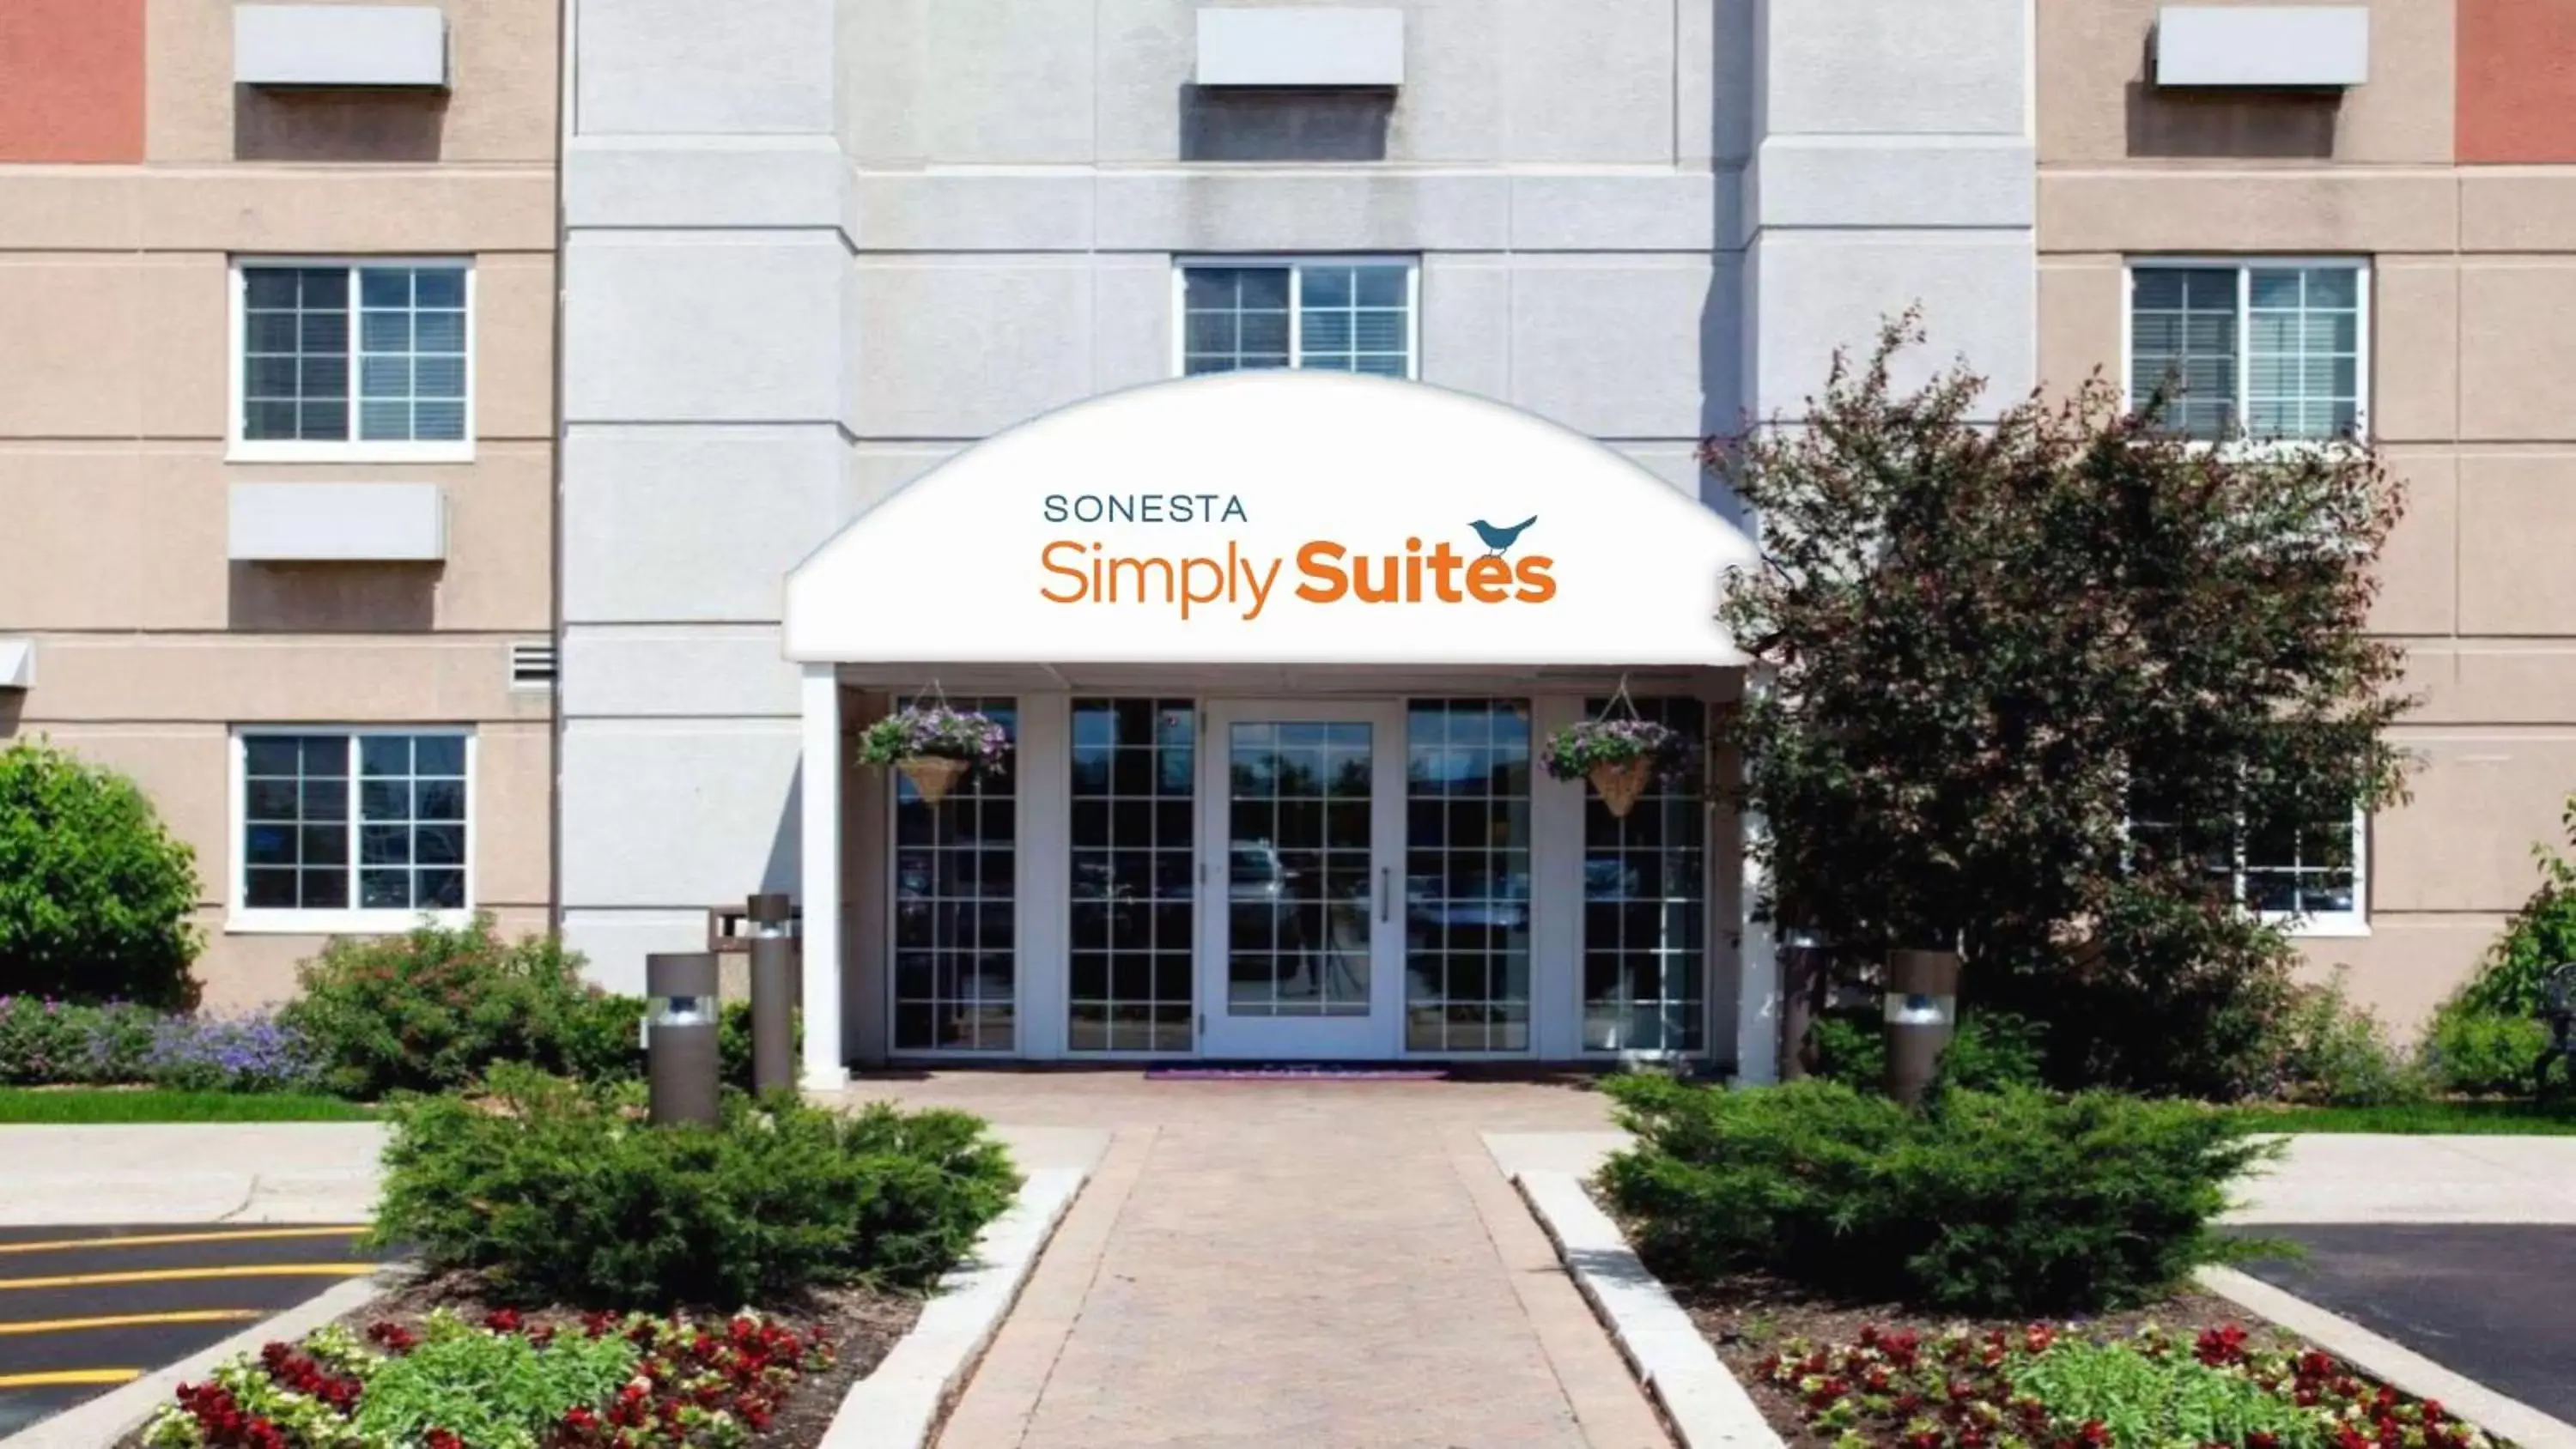 Property building in Sonesta Simply Suites Chicago O'Hare Airport